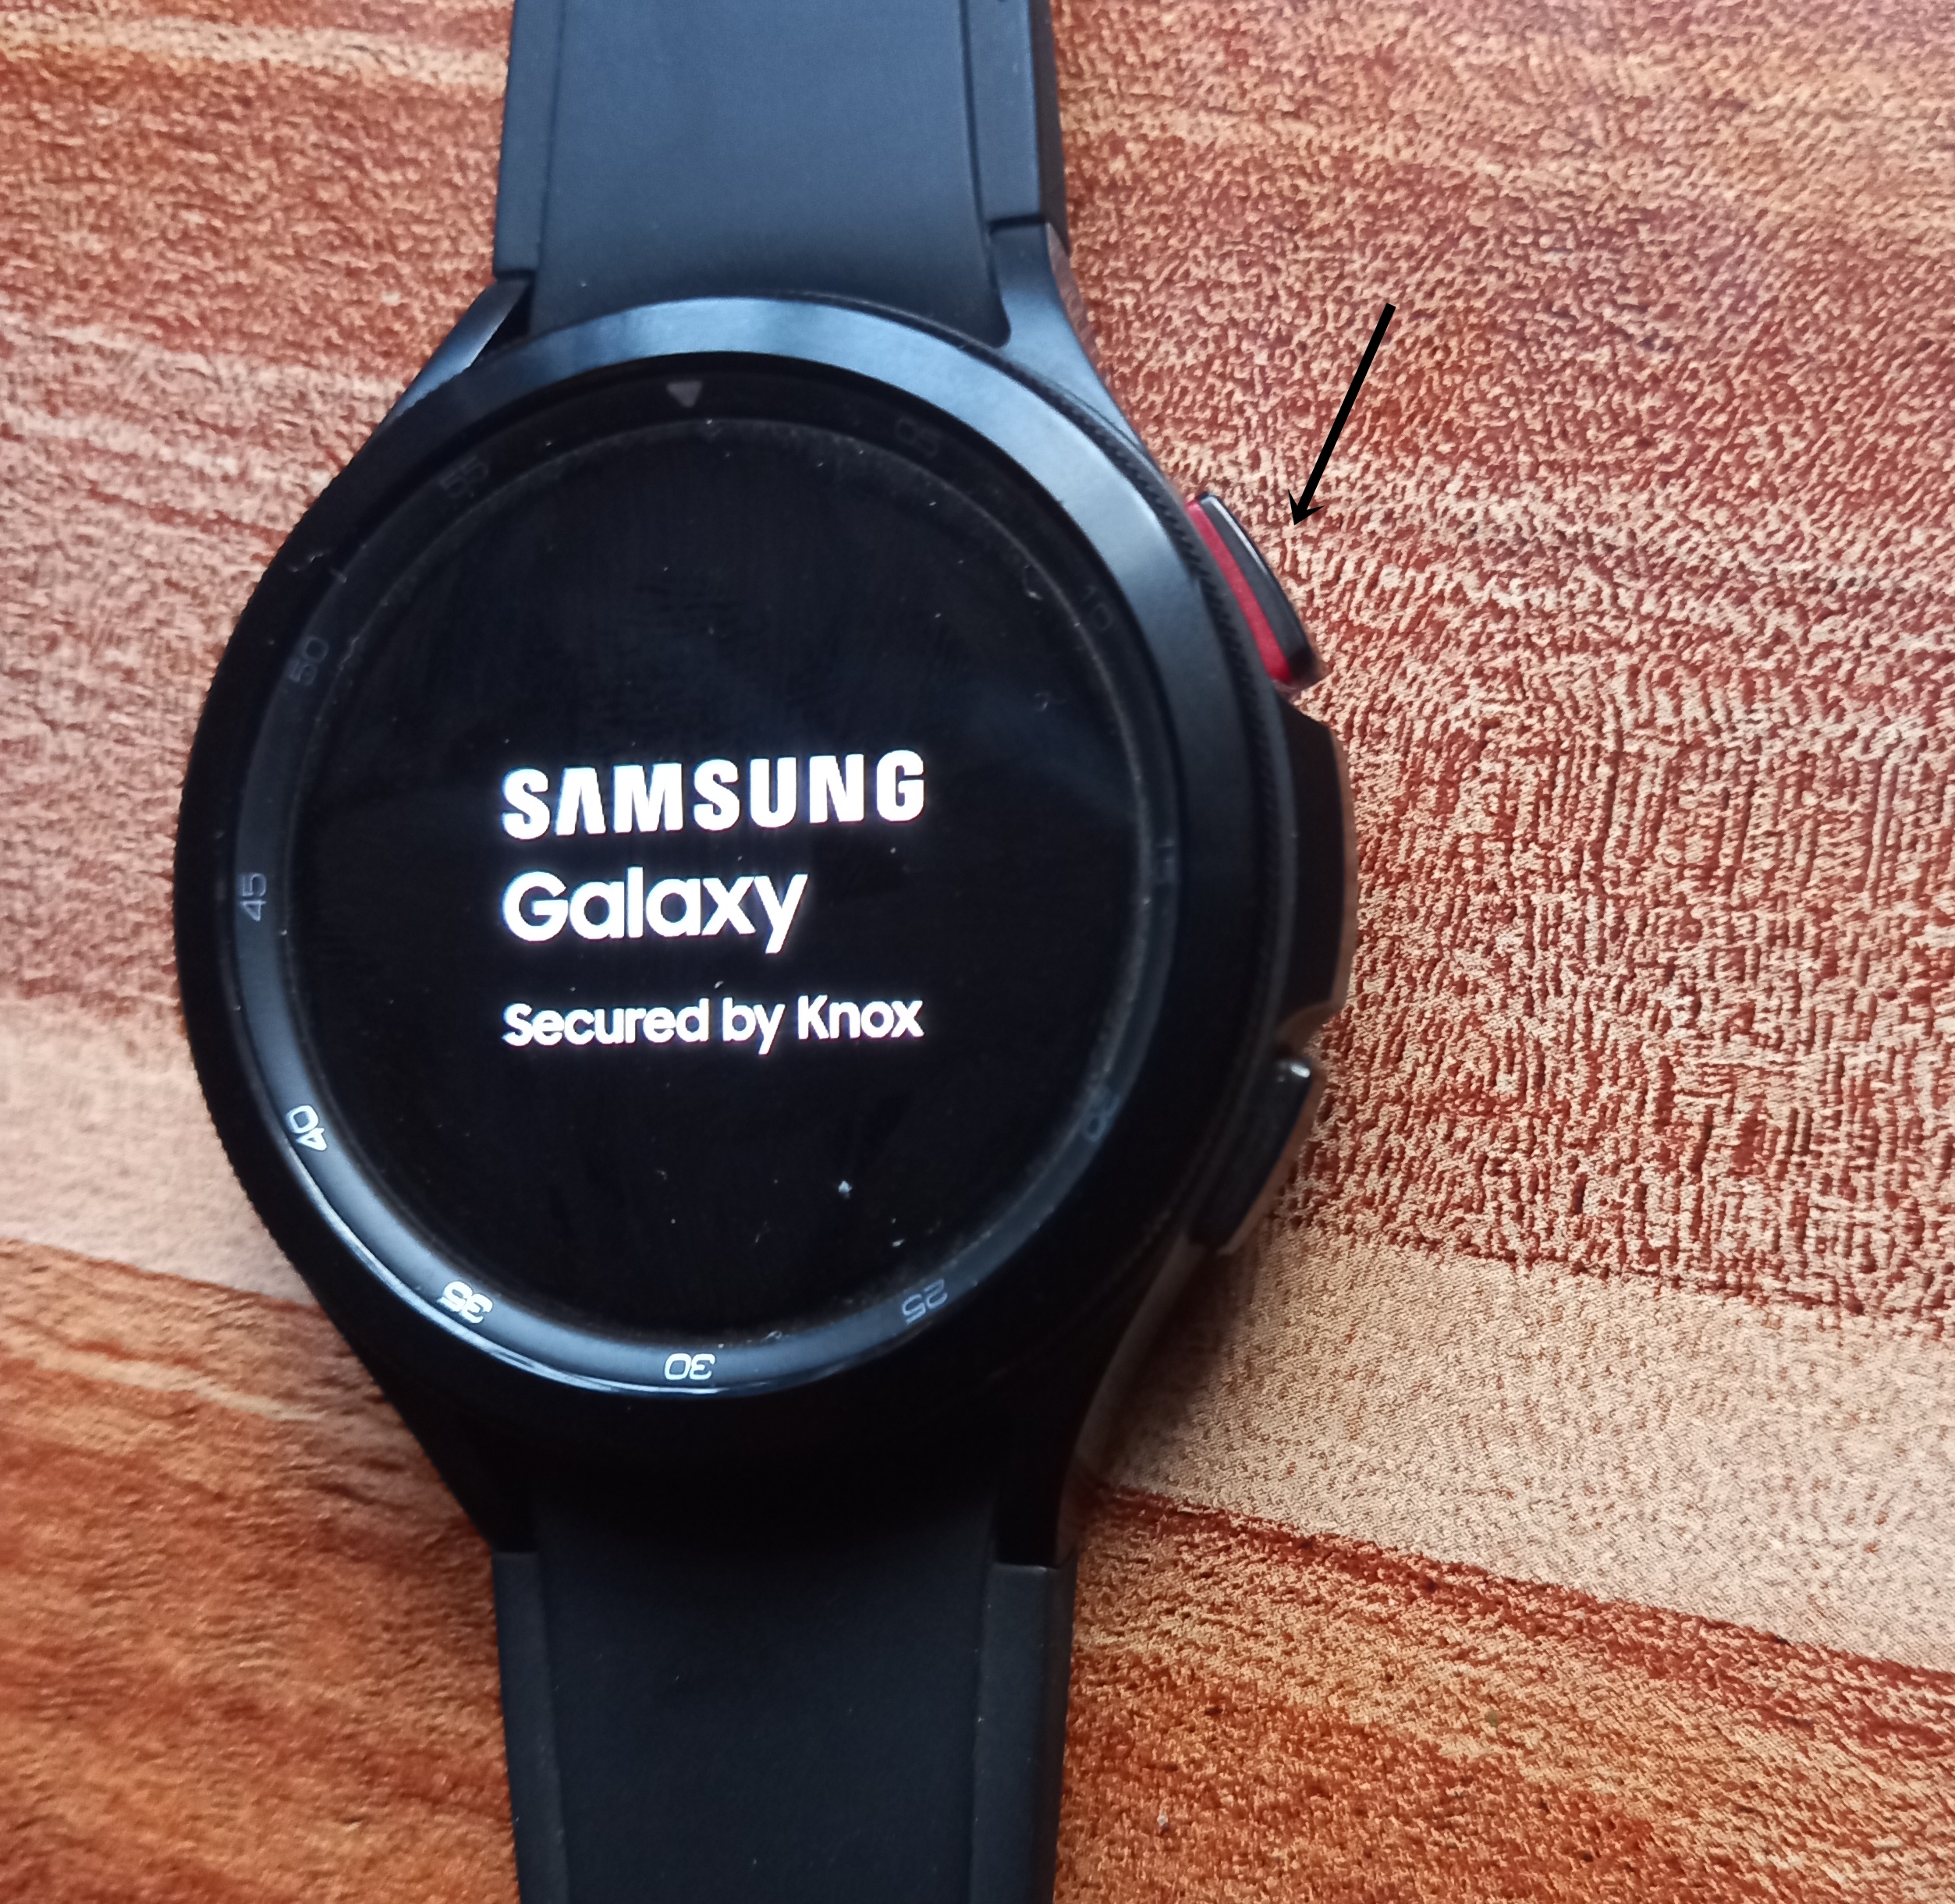 Samsung Confirms Google Assistant is Coming to Galaxy Watch 4